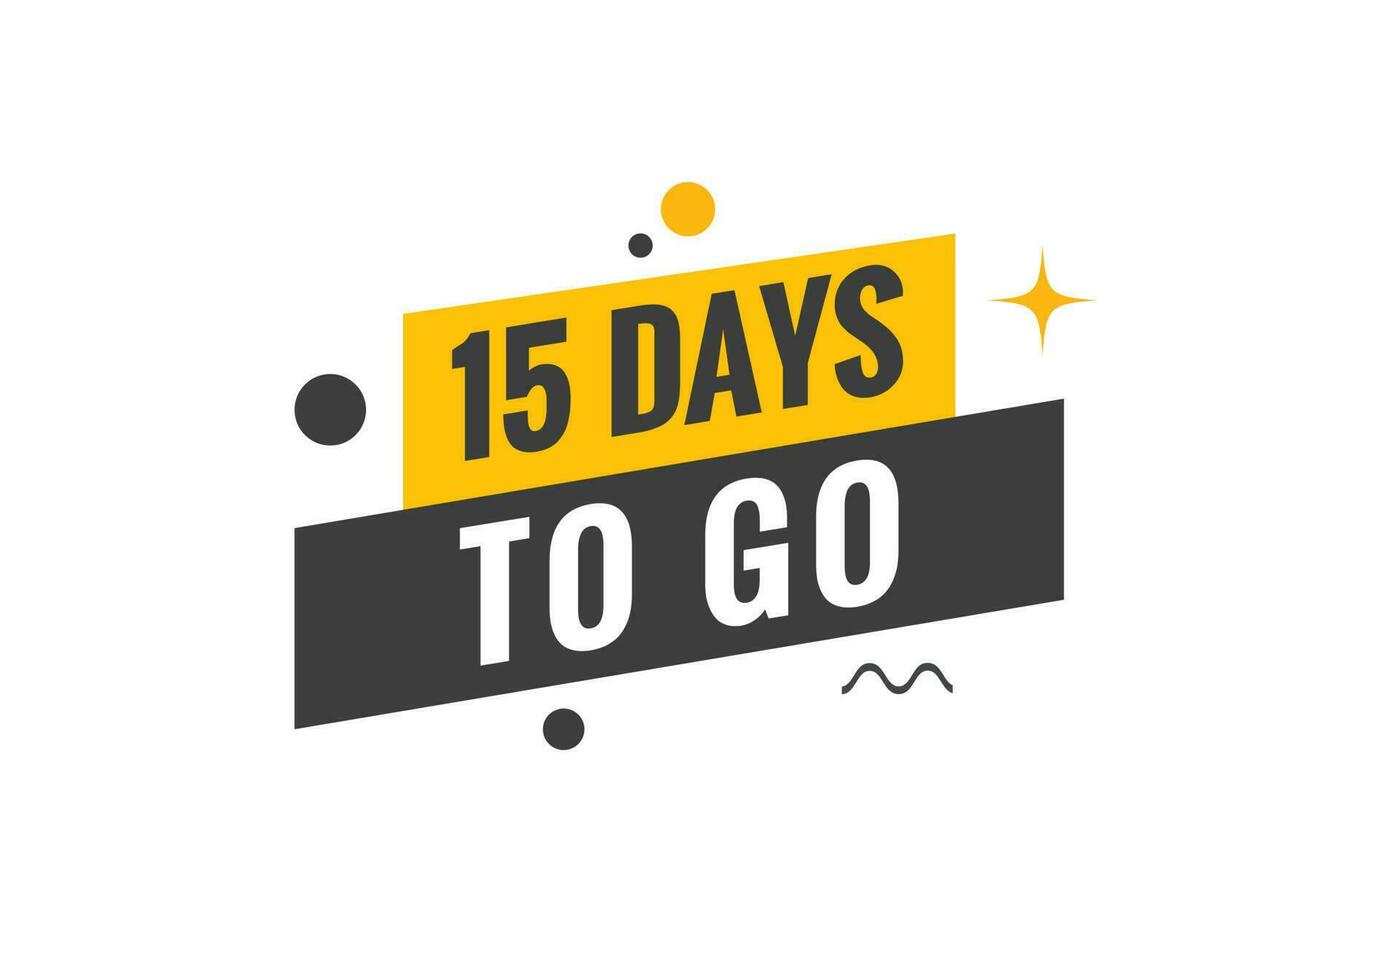 15 days to go text web button. Countdown left 15 day to go banner label vector